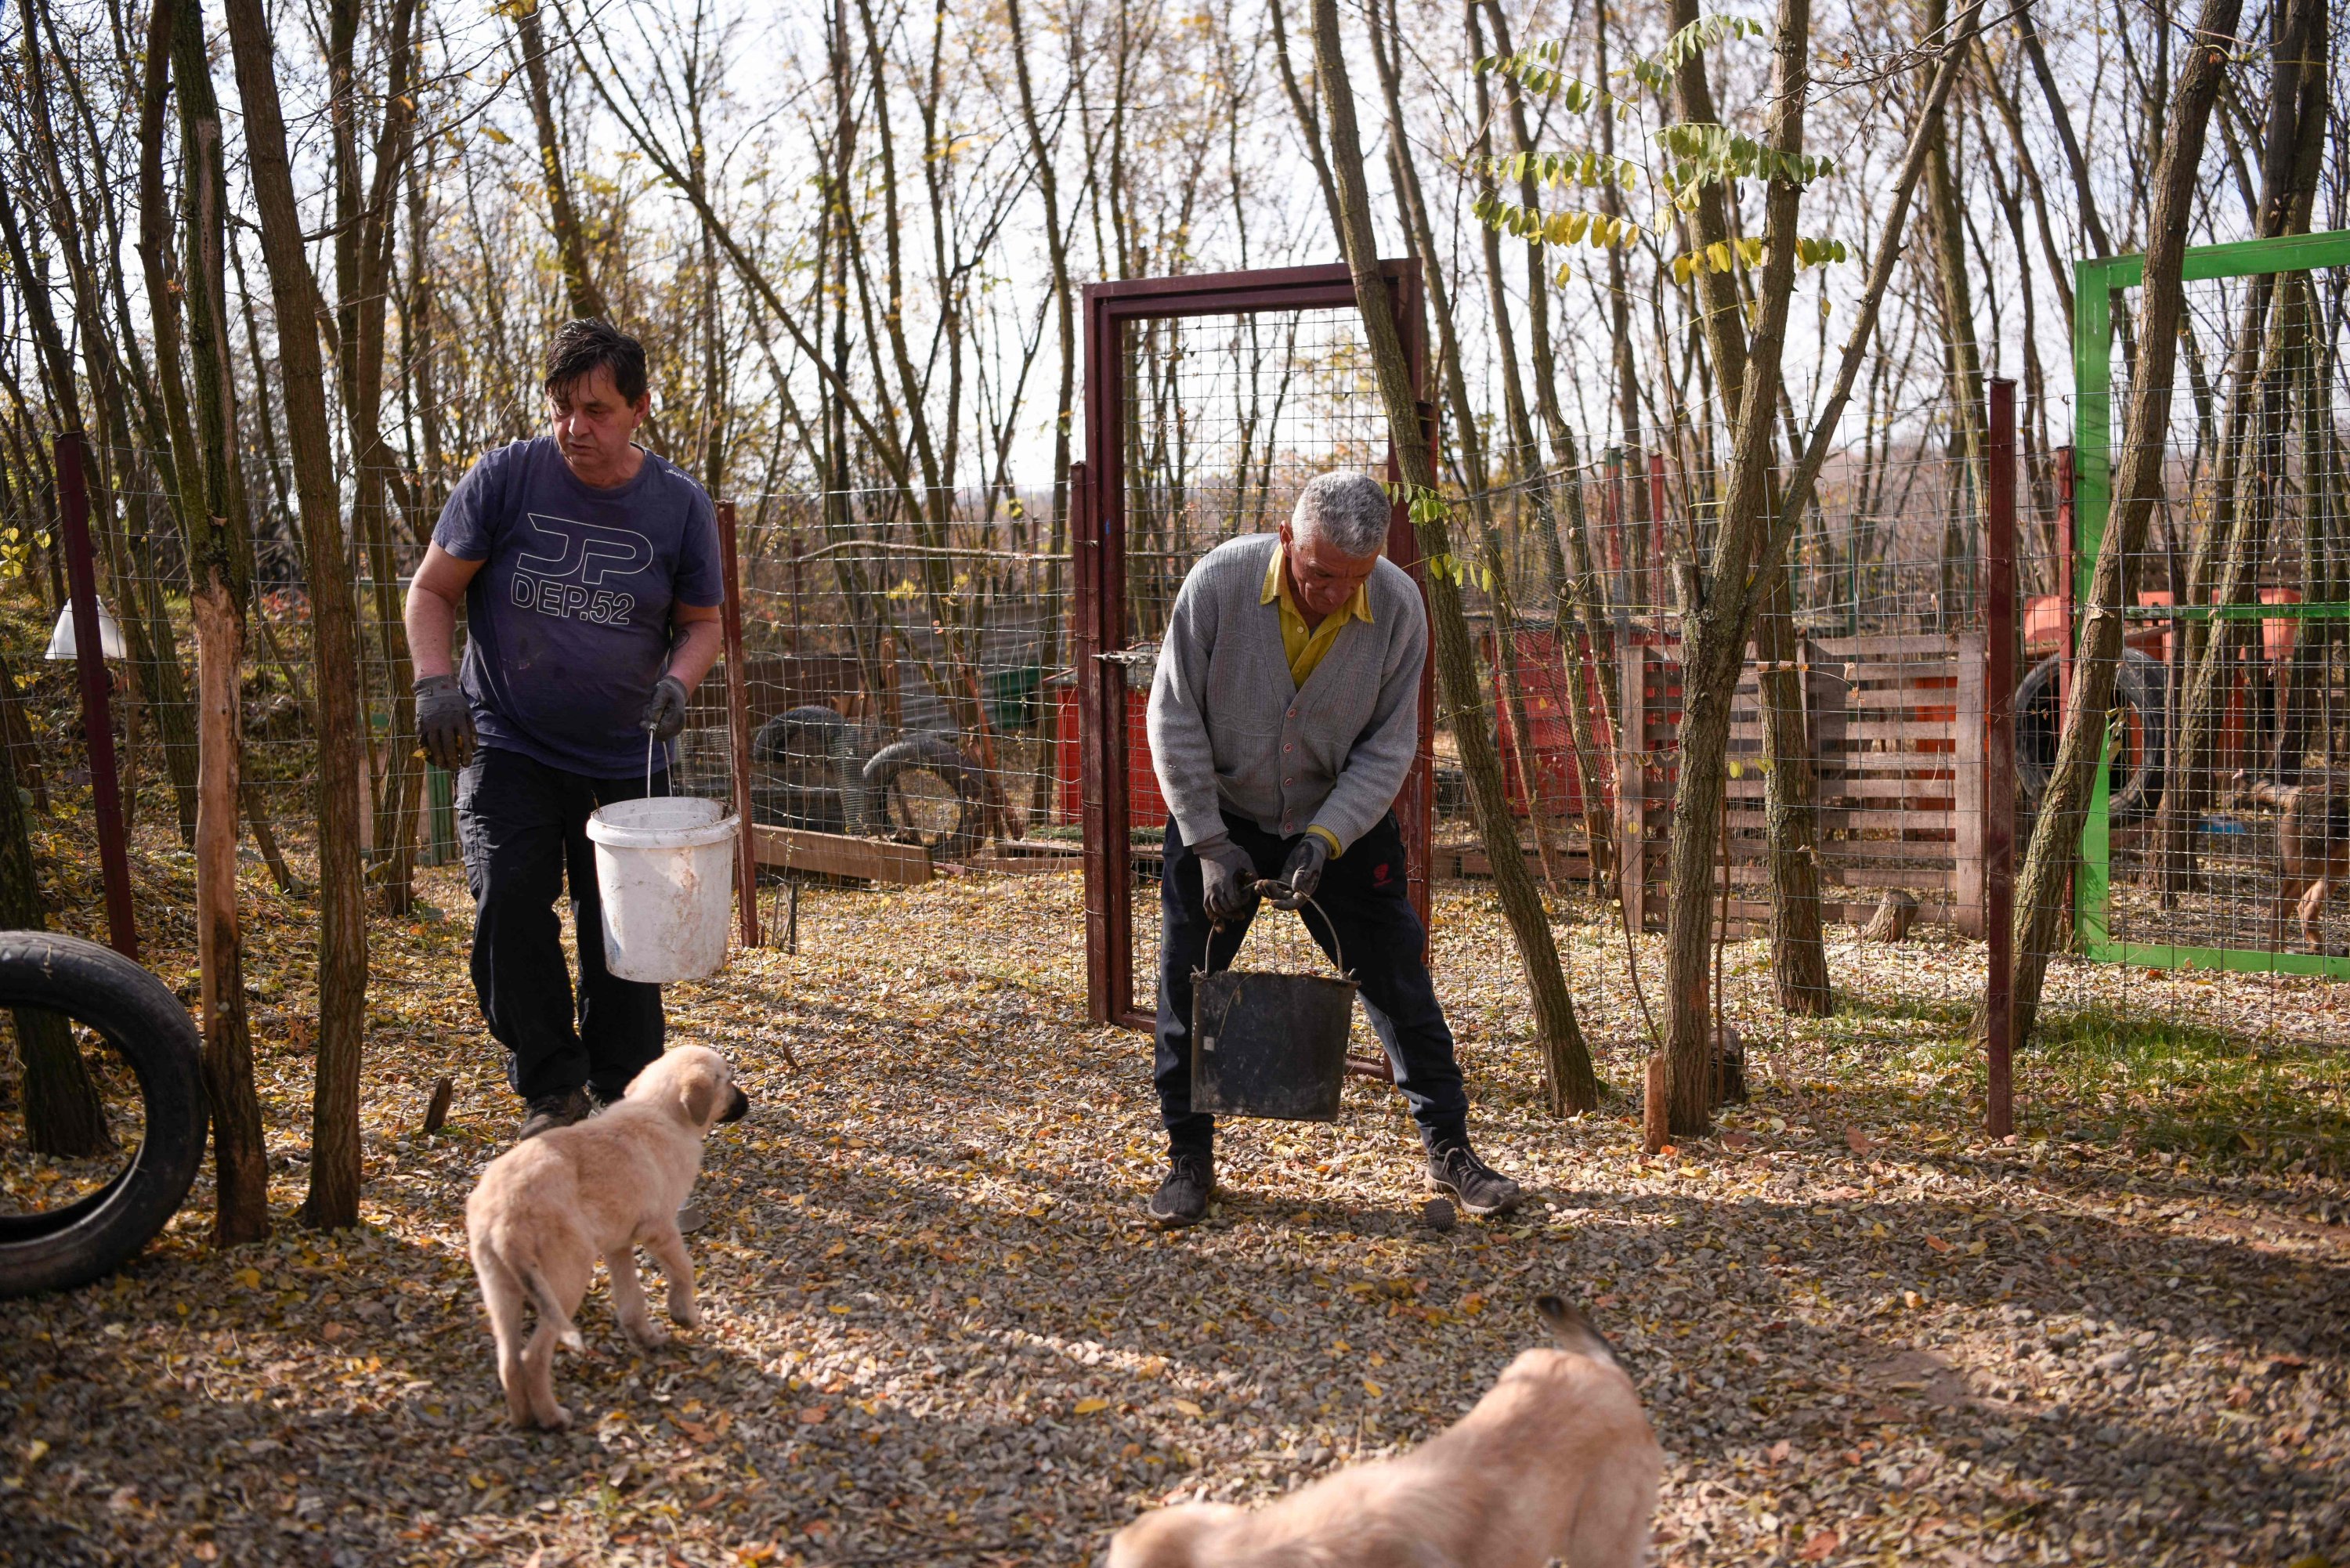 Albanian founder of Pristina Dog Shelter Mentor Hoxha (left) and his Serbian counterpart Slavisa Stojanovic (right) work together at their shelter near the town of Gracanica, Kosovo, November 12, 2021. (AFP Photo)